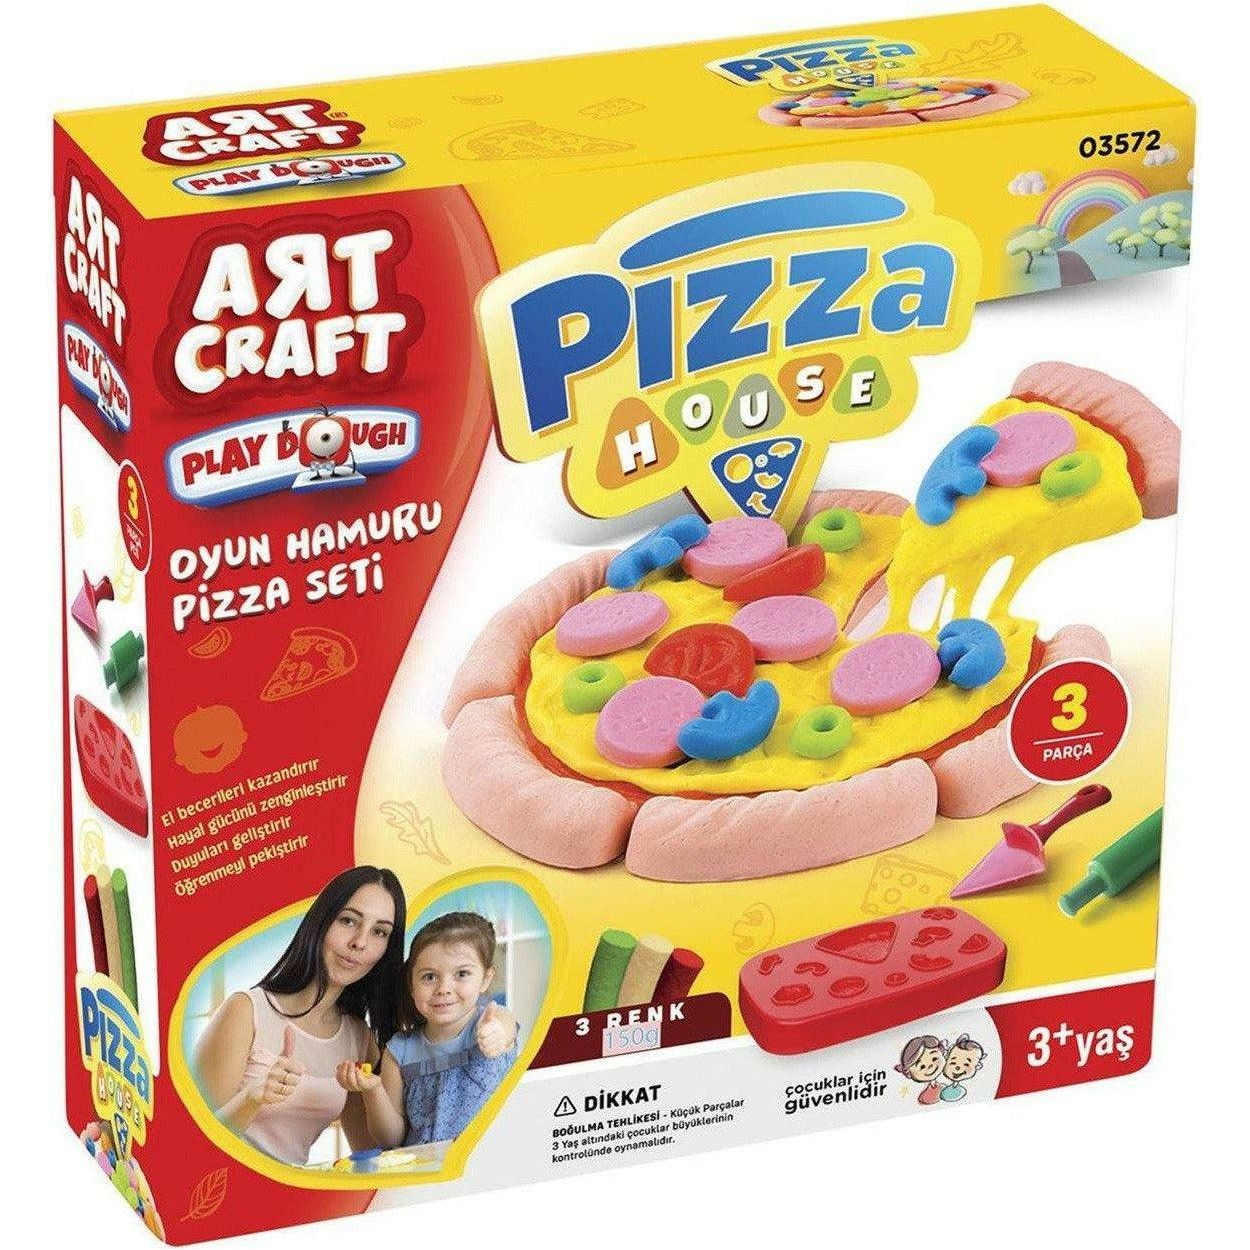 Dede 3572 Art Craft Pizza Play Dough 150 gr - BumbleToys - 5-7 Years, Boys, Cecil, Girls, Make & Create, Play-doh